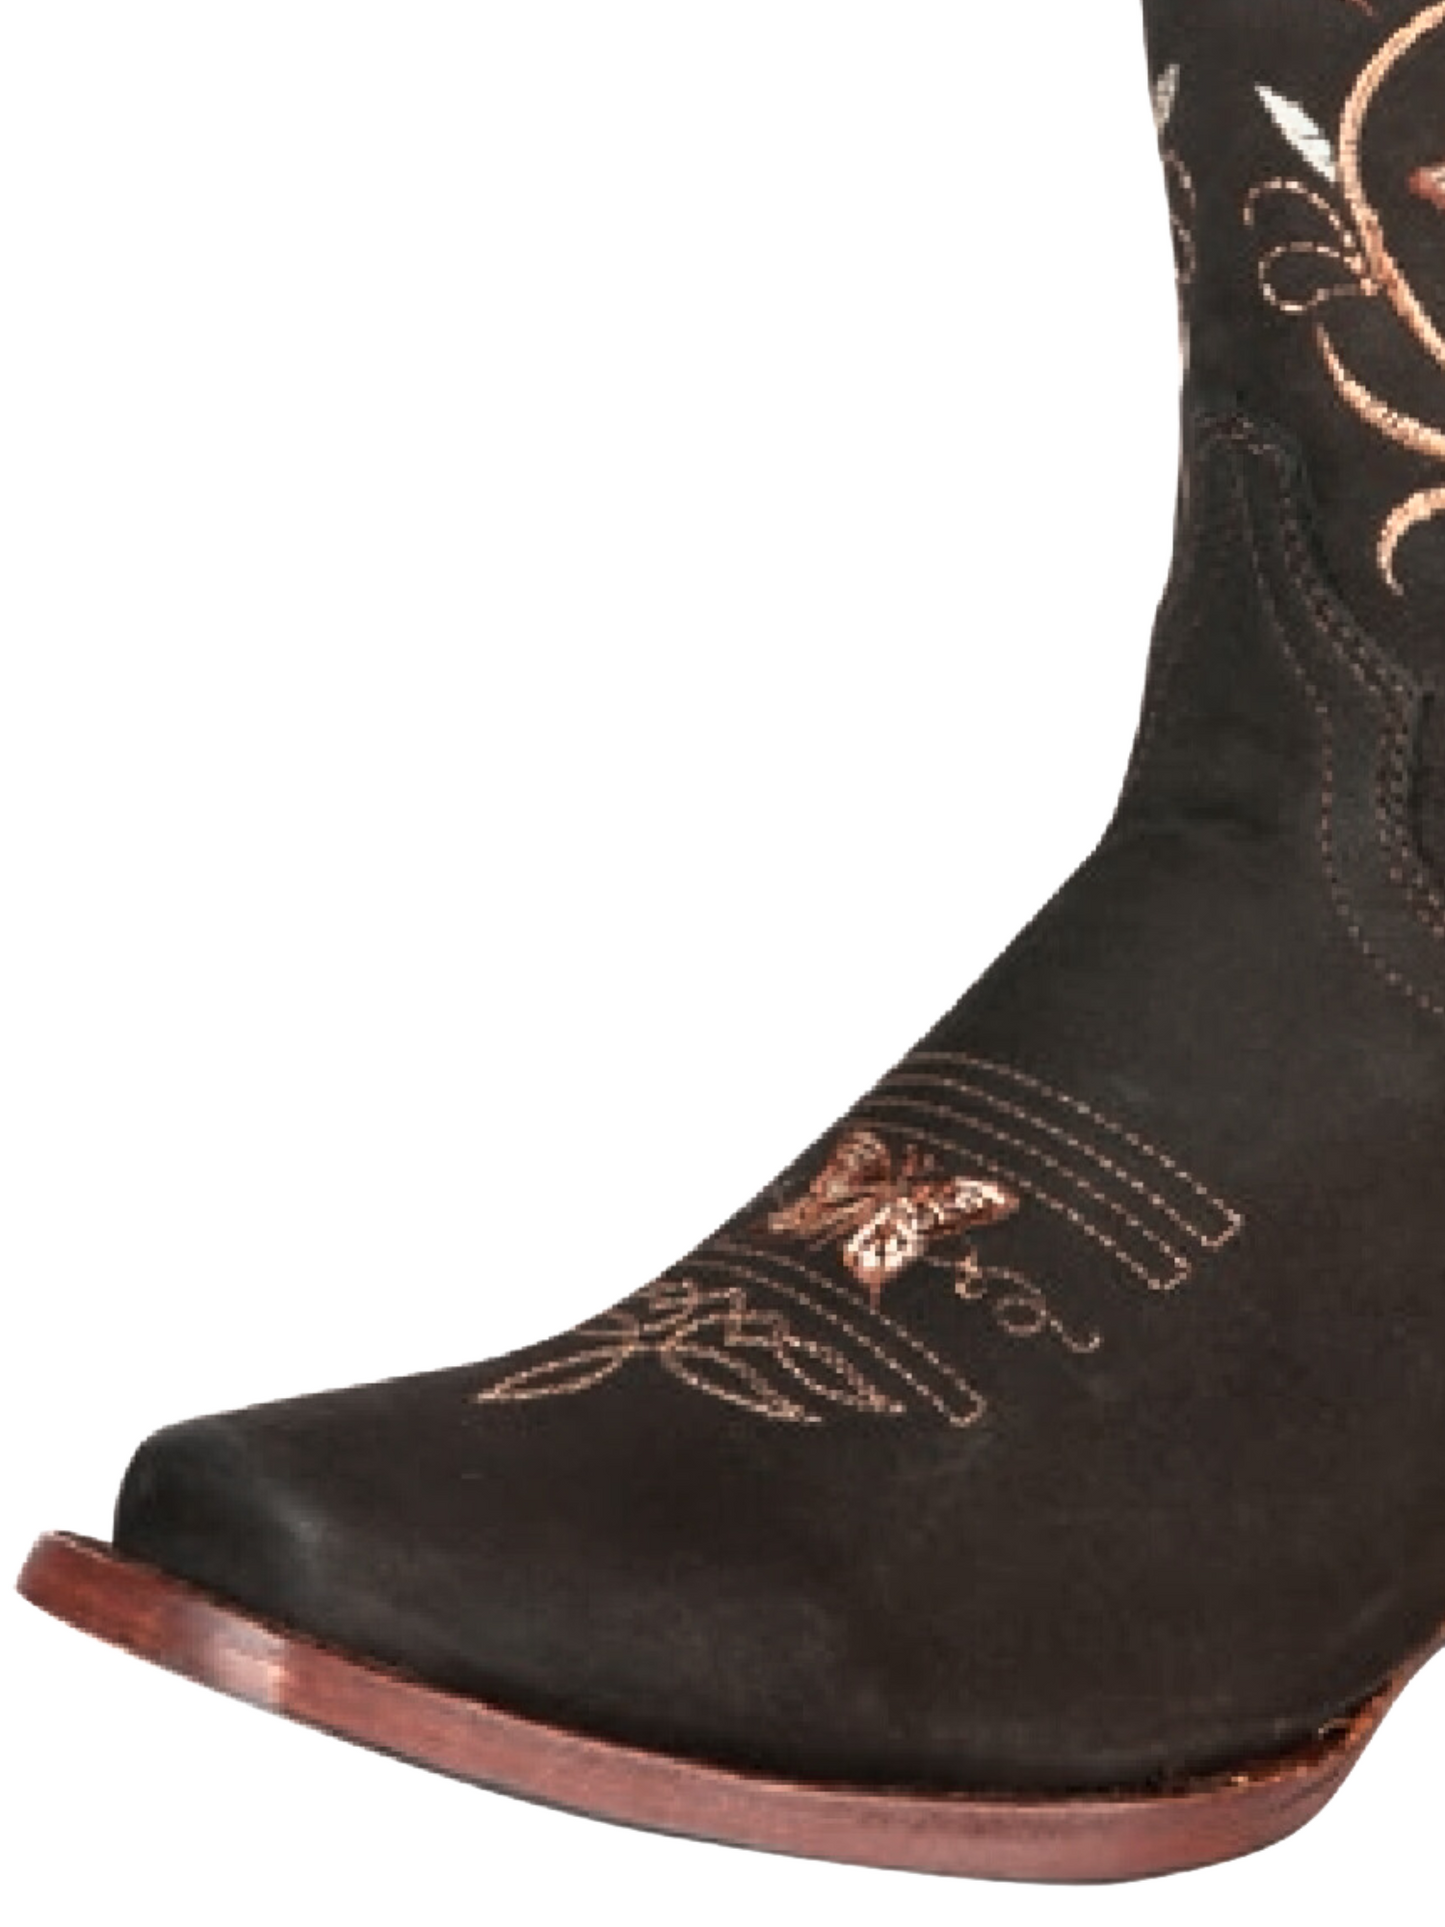 Rodeo Cowboy Boots with Nubuck Leather Butterflies Embroidered Tube for Women 'El General' - ID: 51227